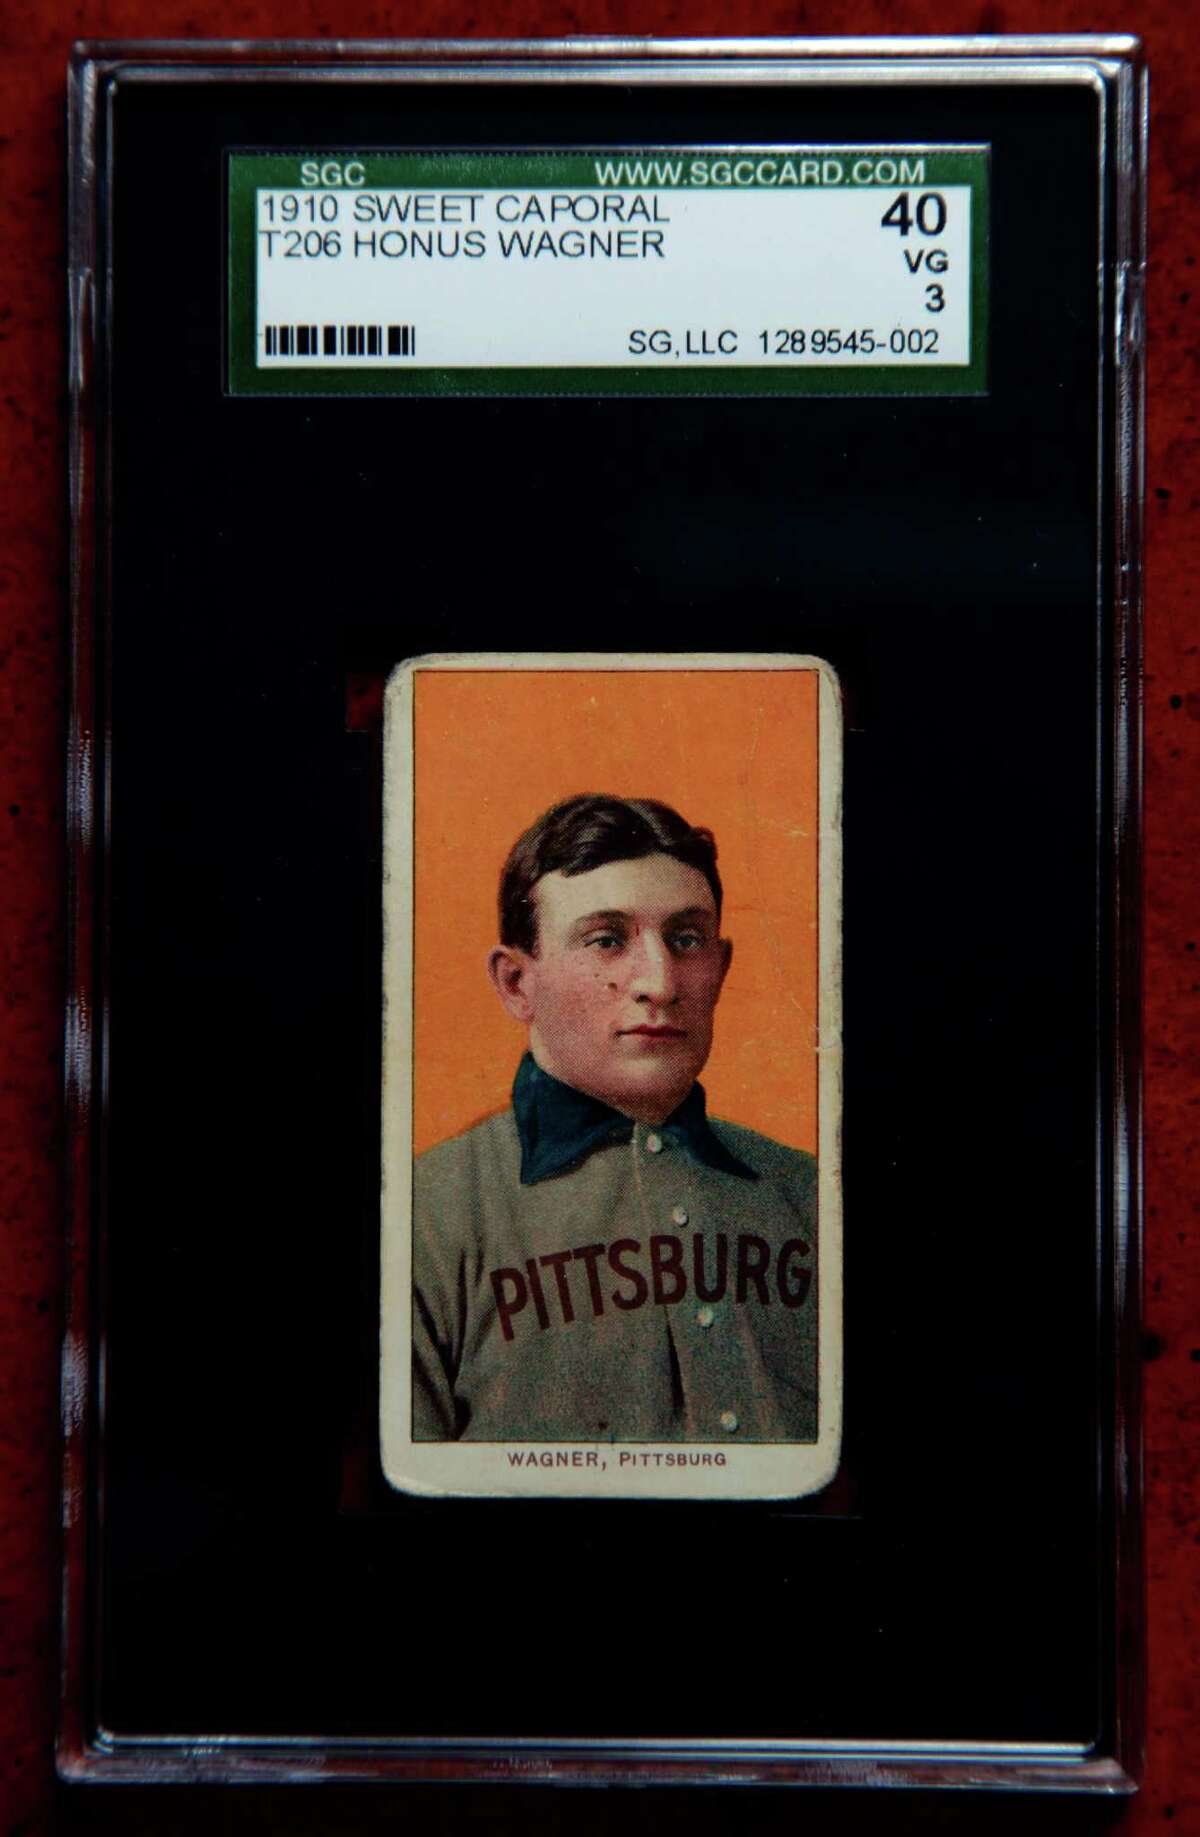 An up-close look at the Honus Wagner baseball card that sold for $1.2 million at auction.